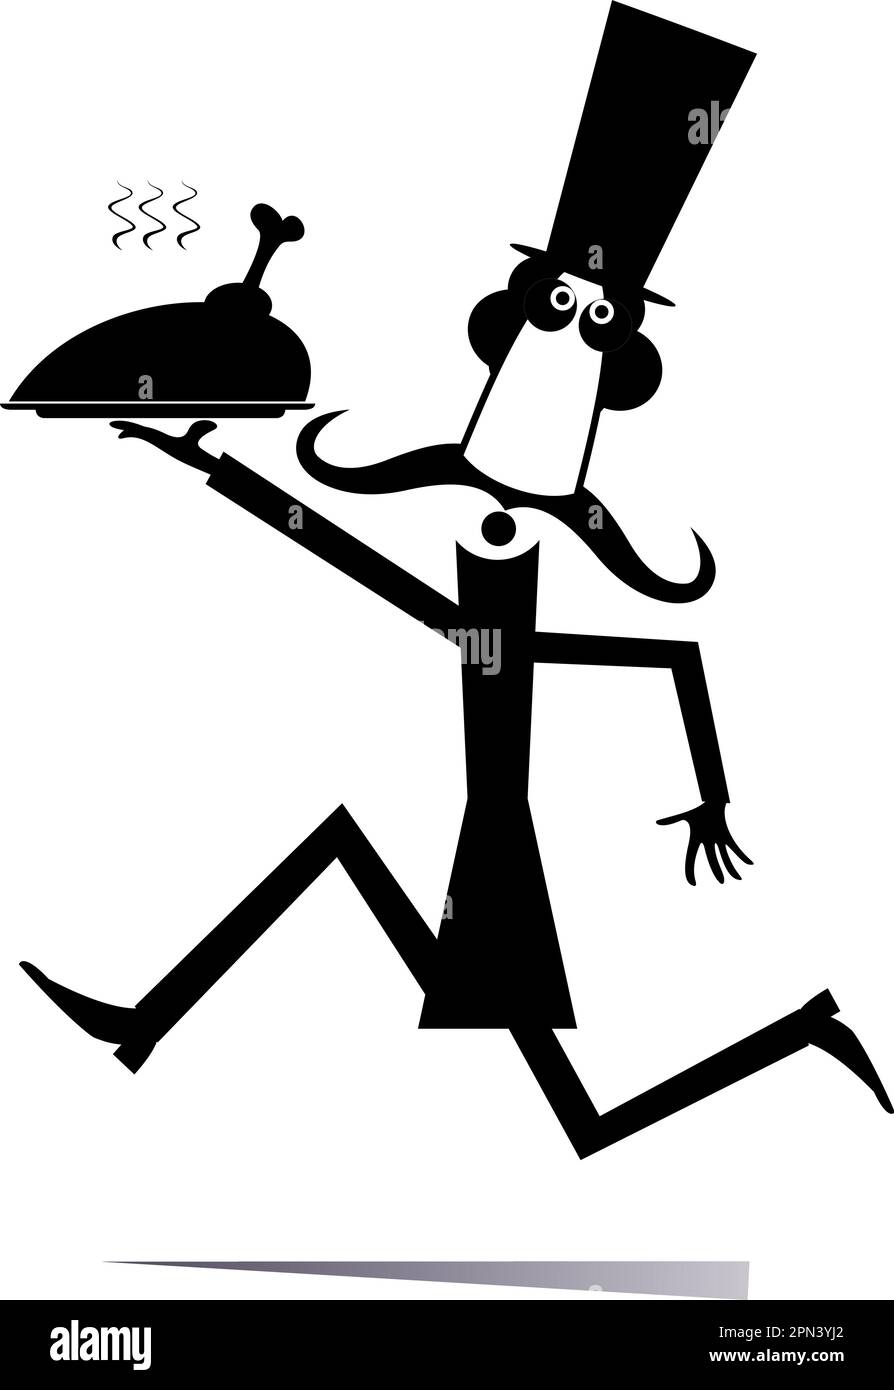 Man carries a tray with meat.  Running long mustache man in the top hat carries a tray with meat, duck or chicken. Black and white Stock Vector